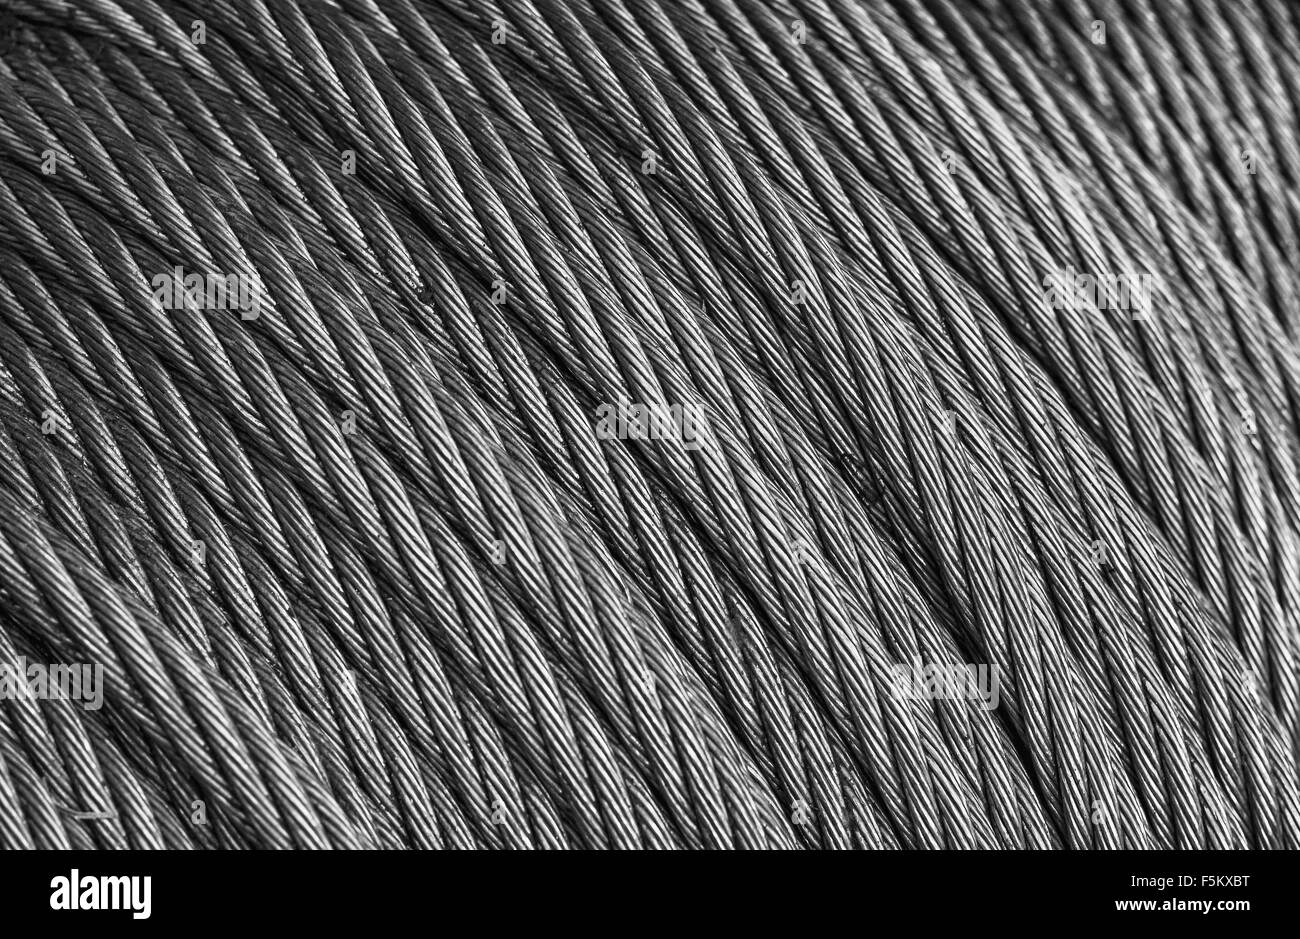 Closeup of a steel cable wrapped in a roll Stock Photo